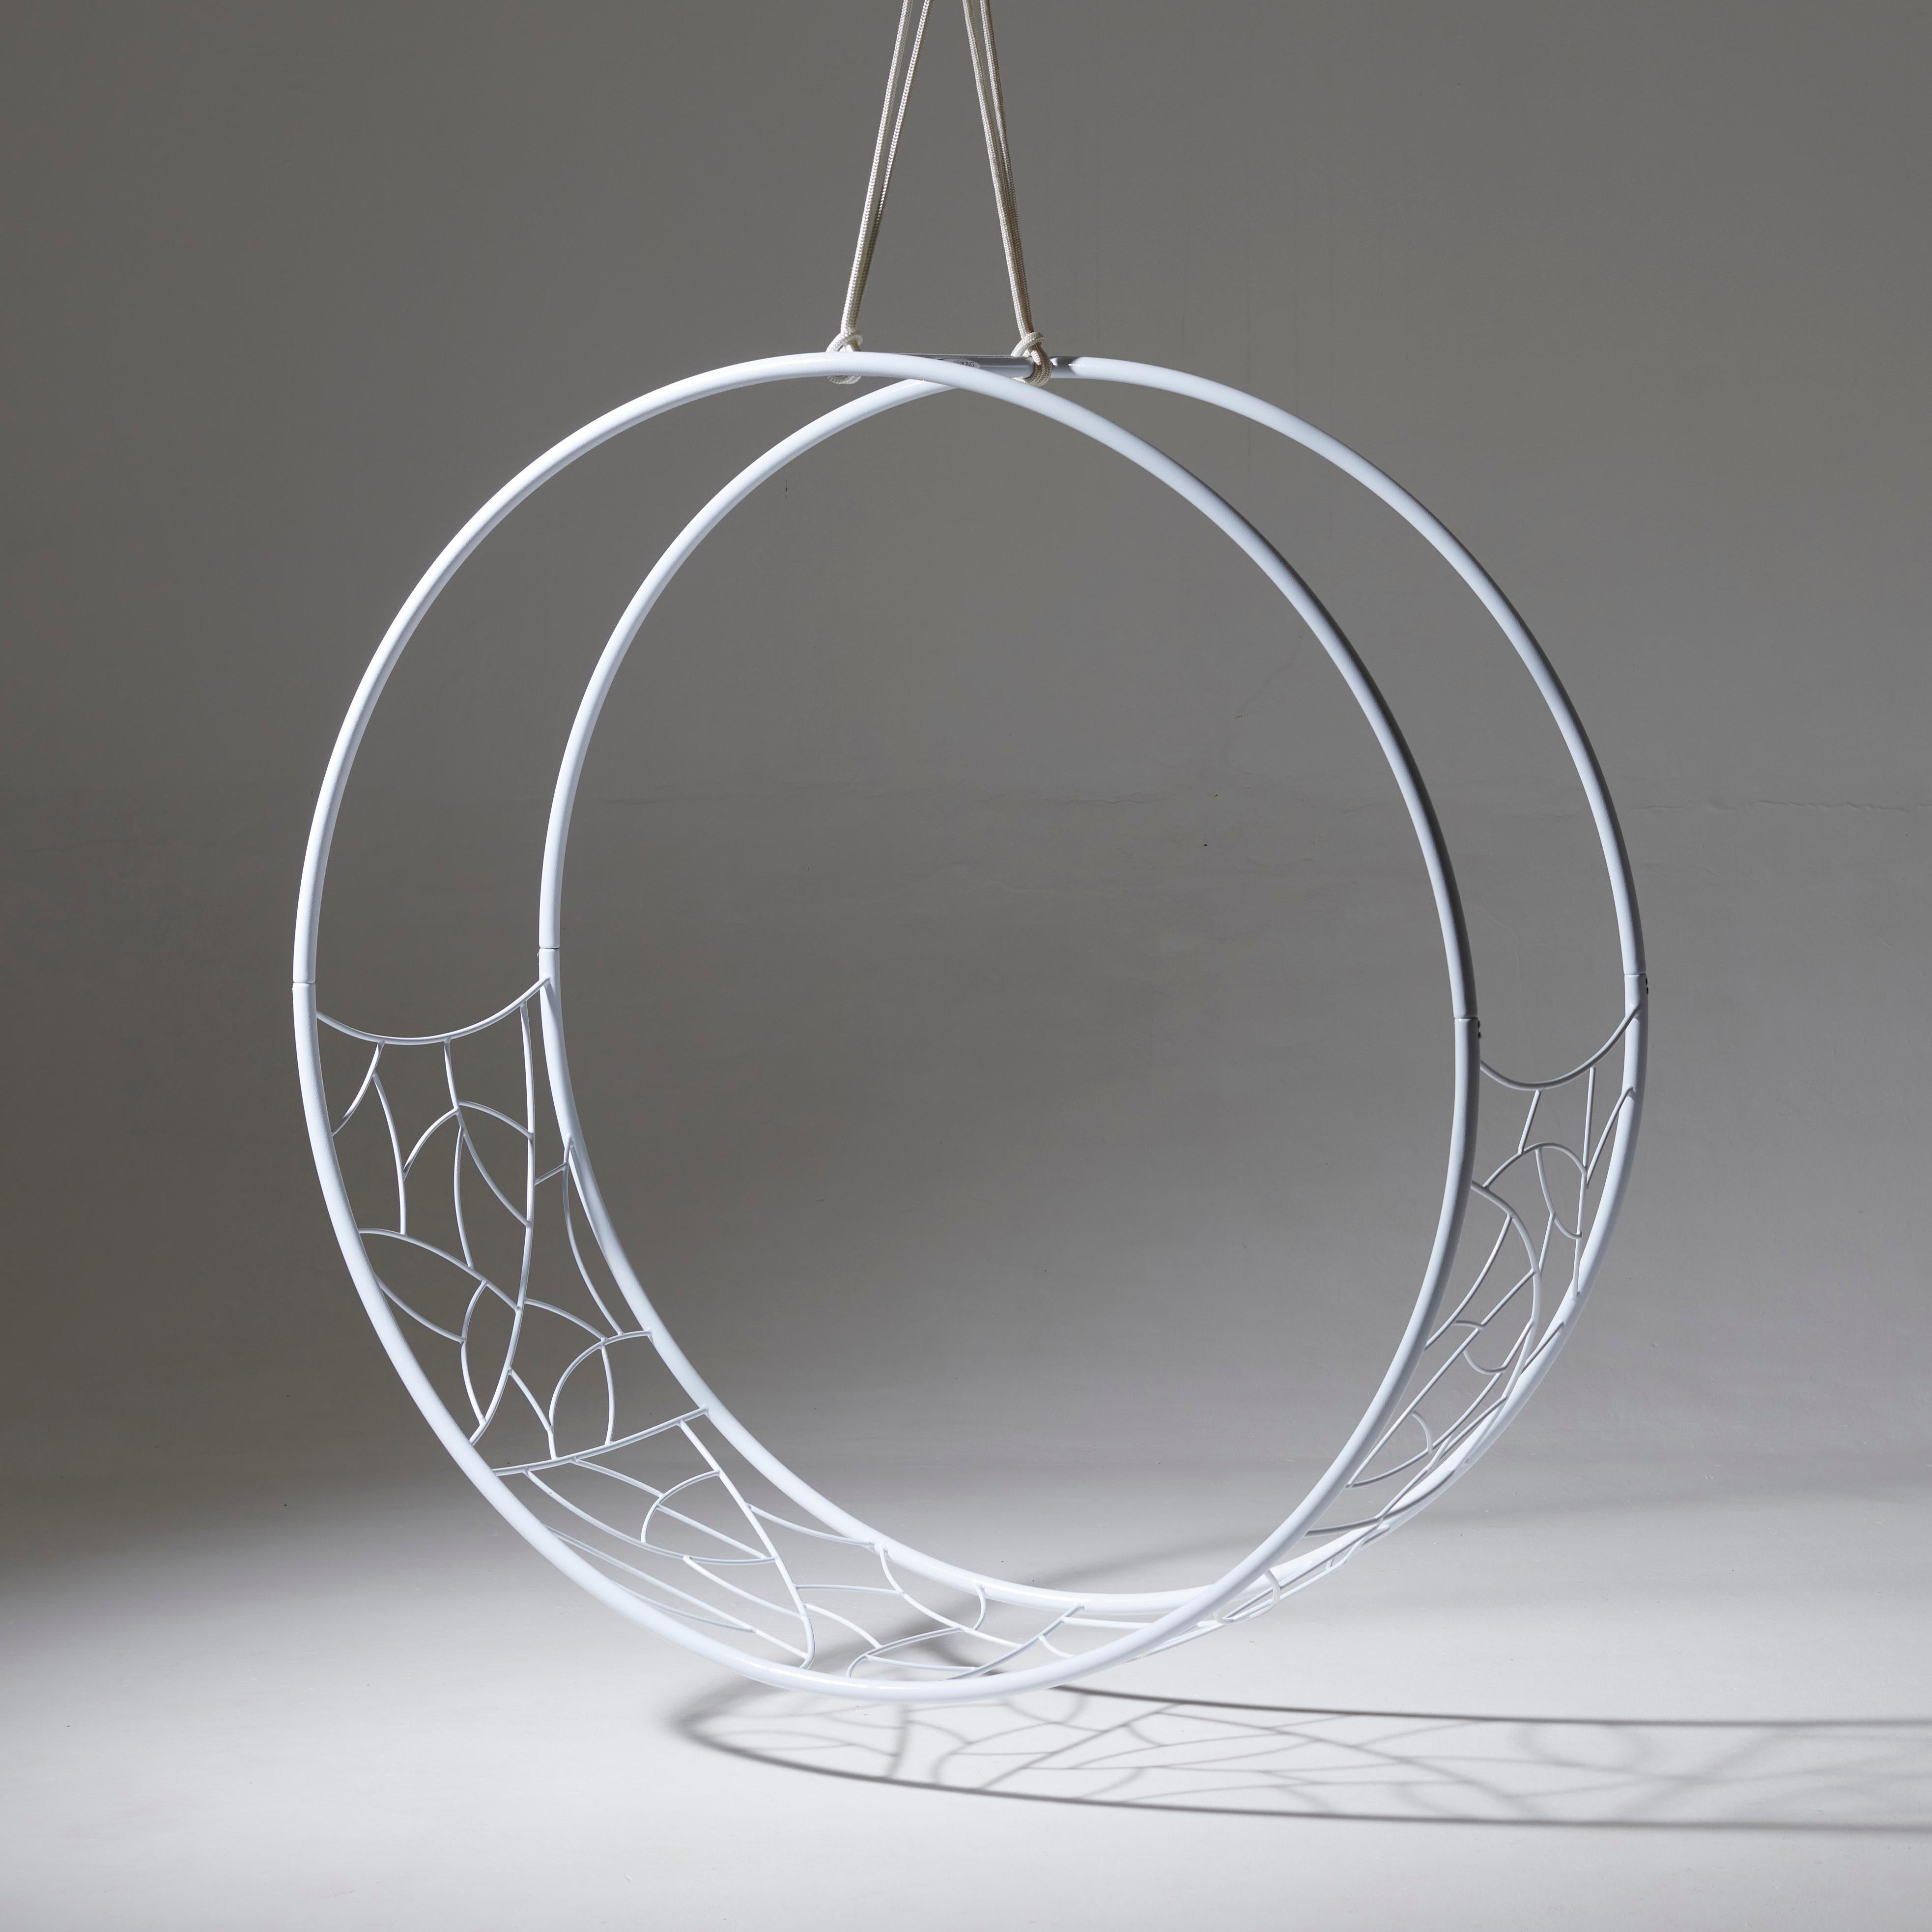 The Wheel hanging chair swing seat is sculptural and dynamic. Its striking circular shape lends itself for use as a functional art piece.

The chair has an open yet enveloping feel. The pattern detail is inspired by nature and reminiscent of the